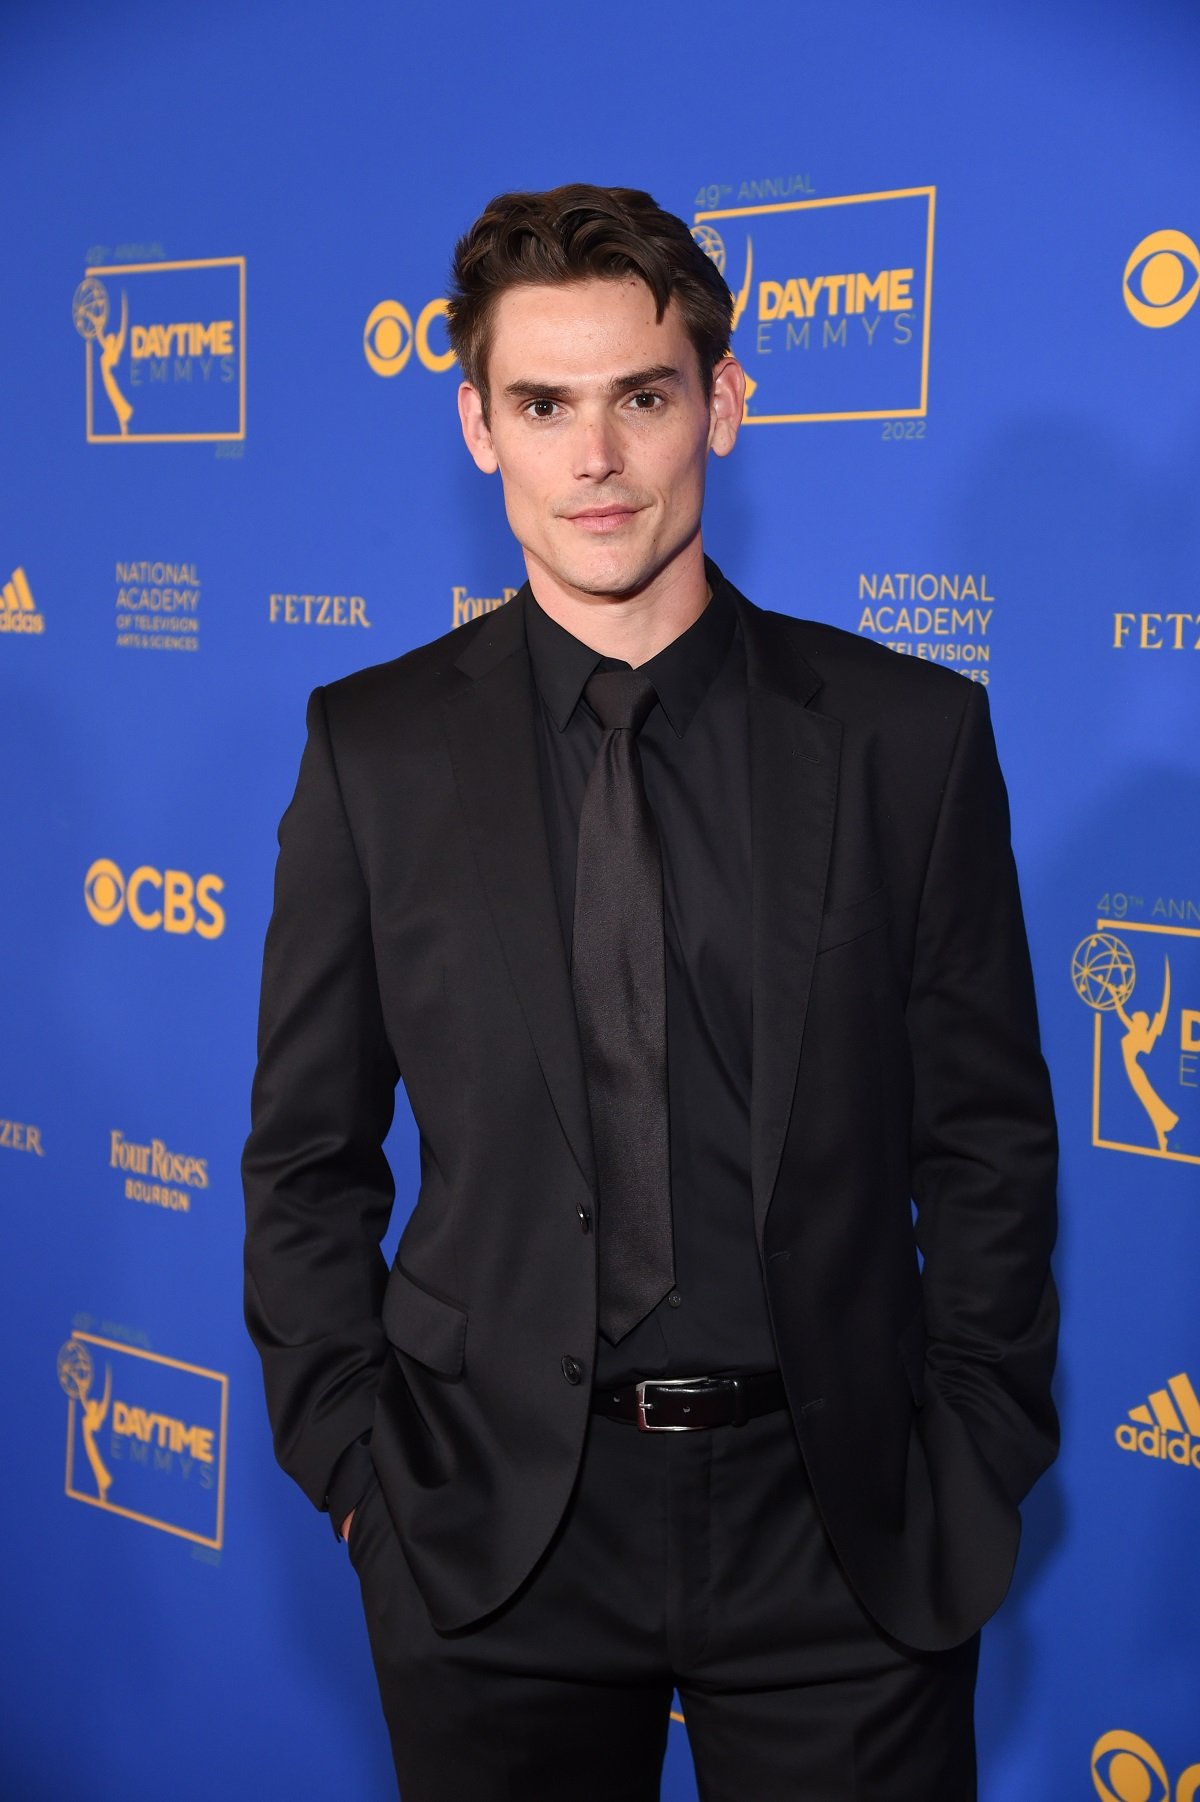 'The Young and the Restless' star Mark Grossman's rumored exit has fans worried about Adam Newman.